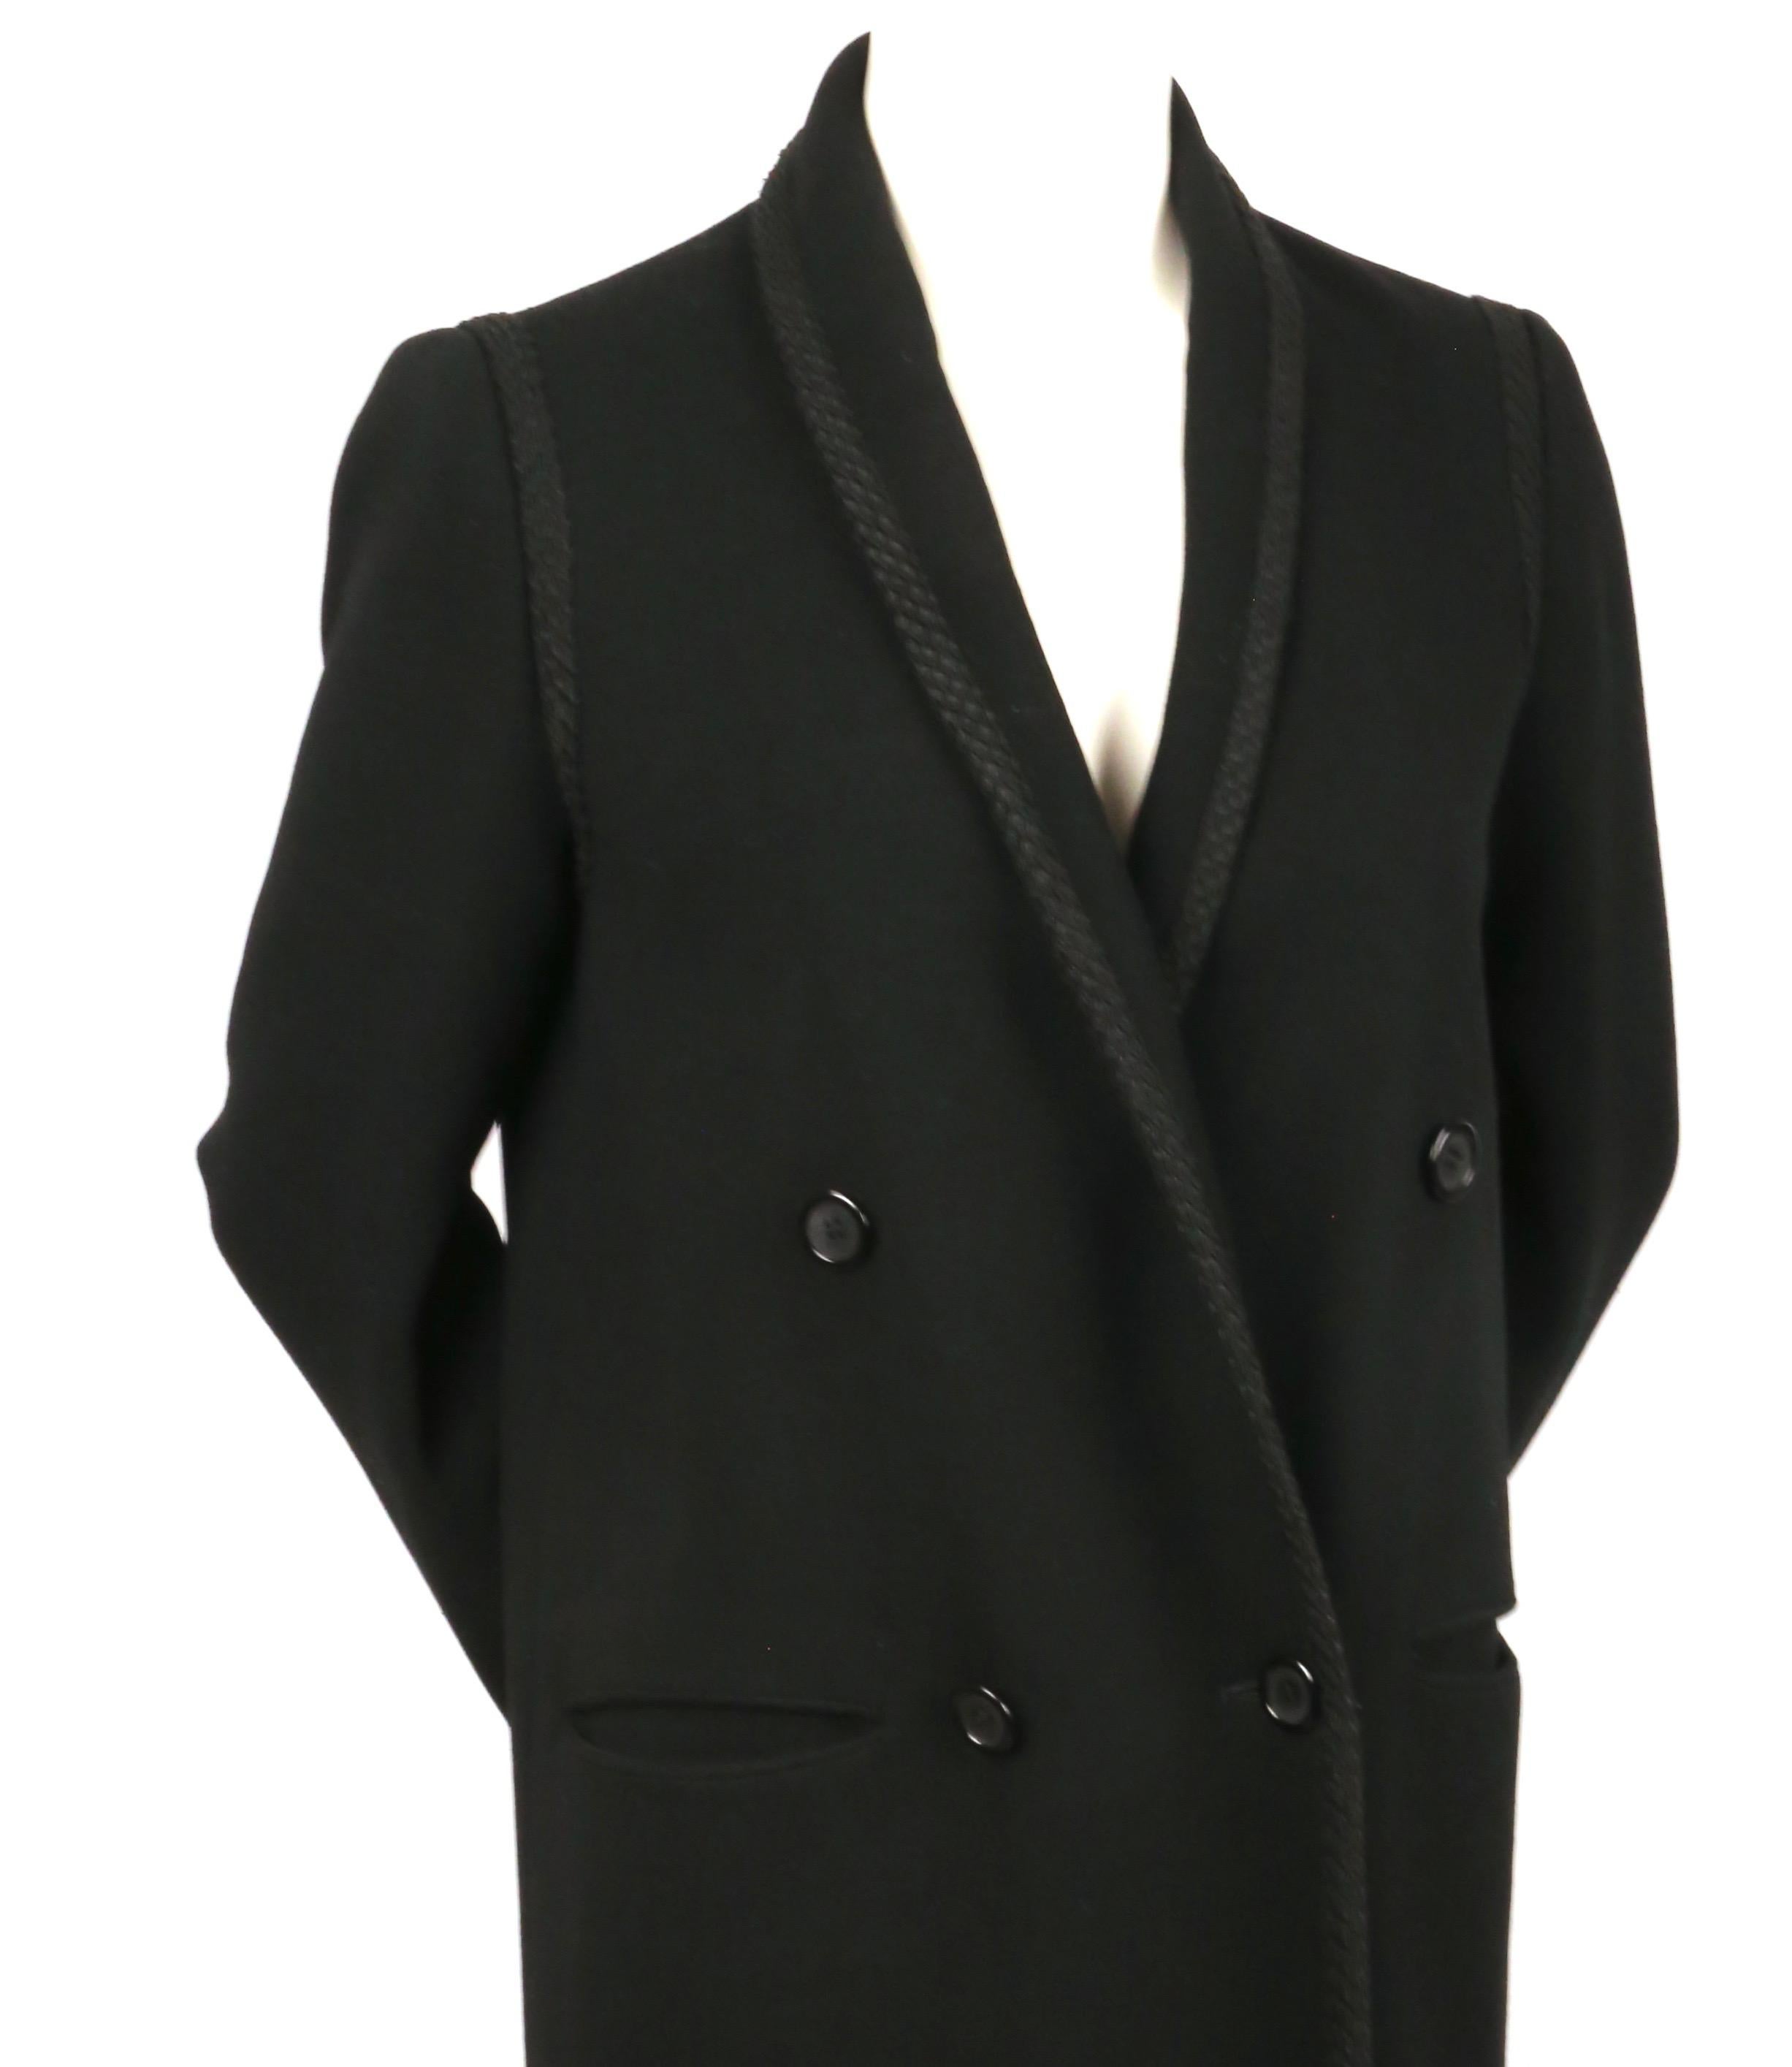 Classic, structured, black wool coat with double breasted collar and beautiful decorative corded trim designed by Bill Blass dating to the late 1970's, early 1980's. Labeled a US 8 however this runs small especially through the shoulders. It was